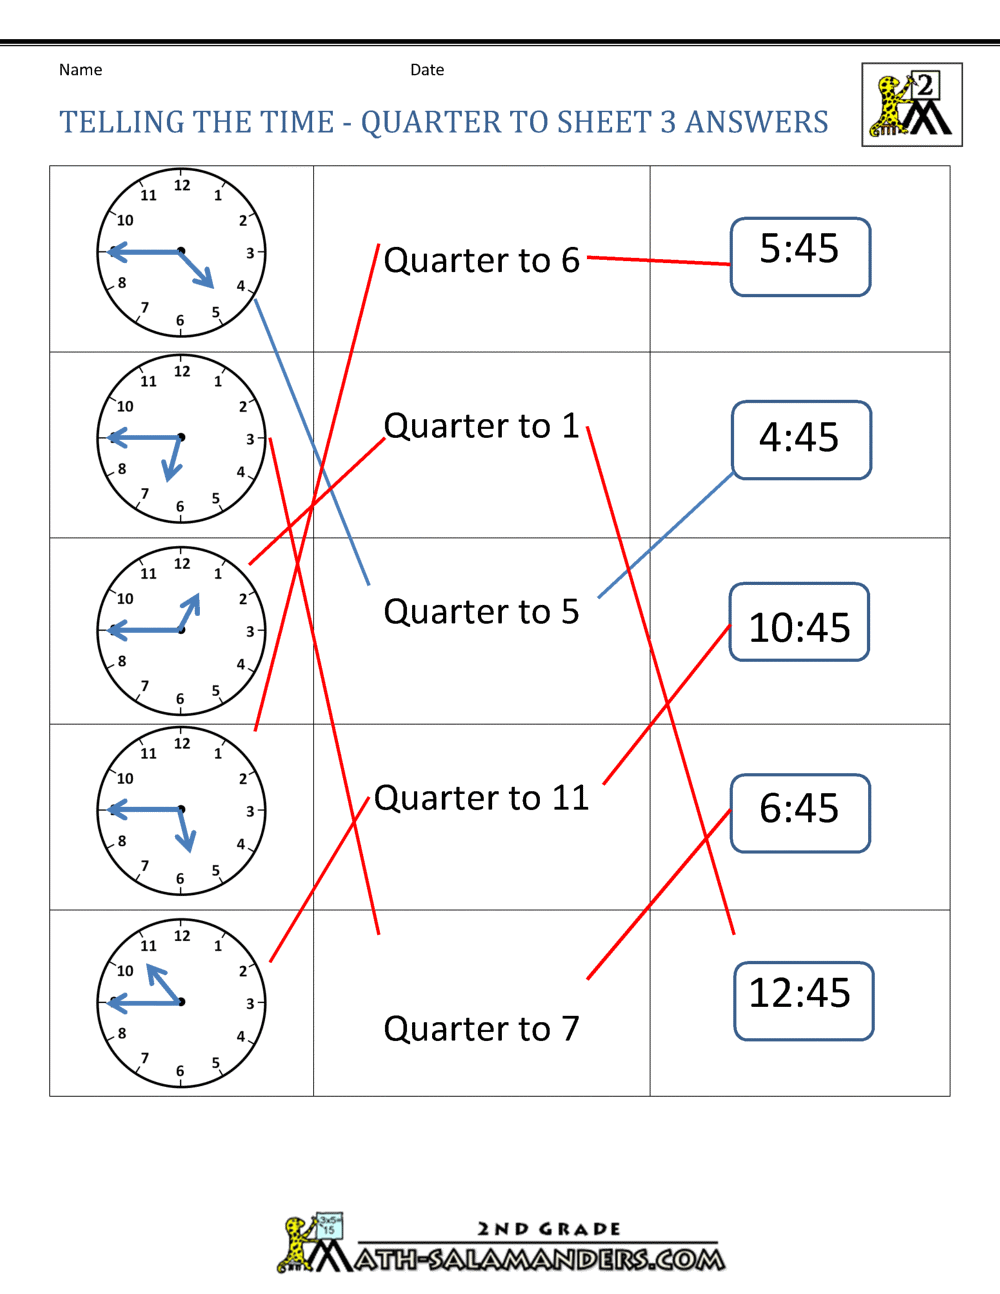 time time answers telling time elapsed 3ans.gif worksheets the quarter to  worksheets